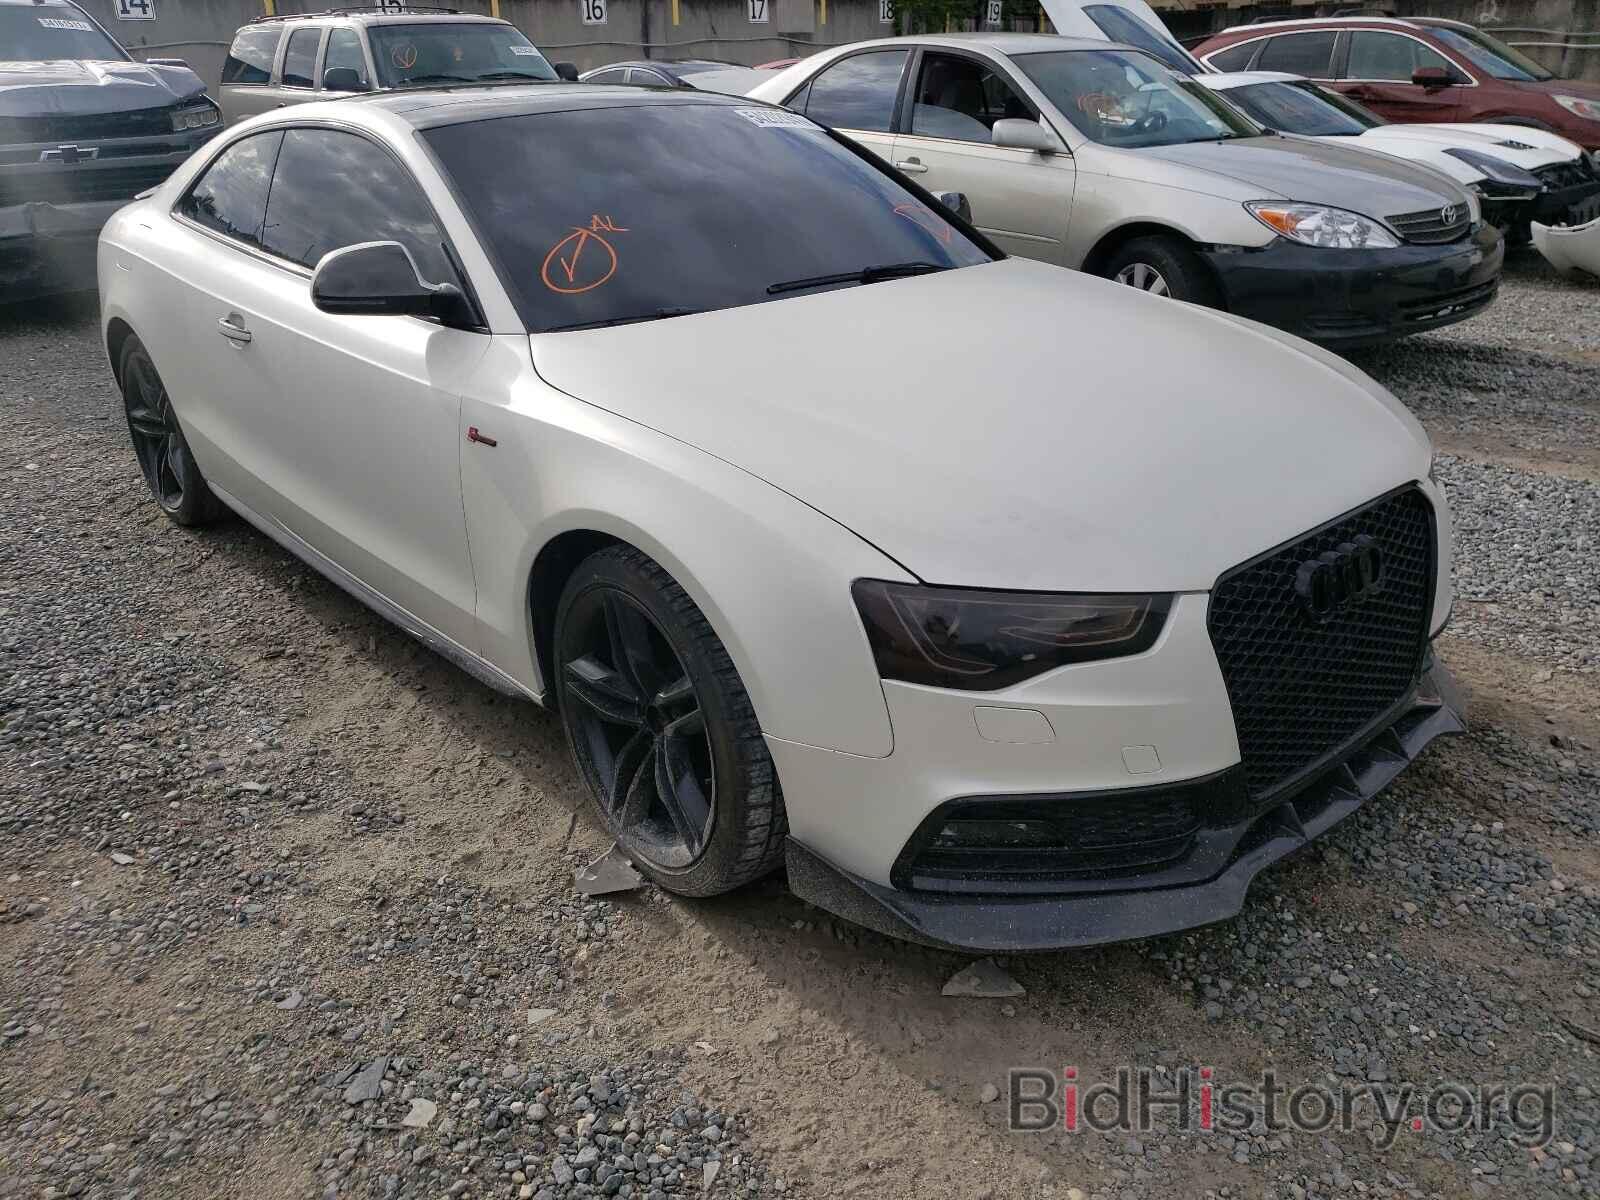 Photo WAUVVAFR3BA003505 - AUDI S5/RS5 2011